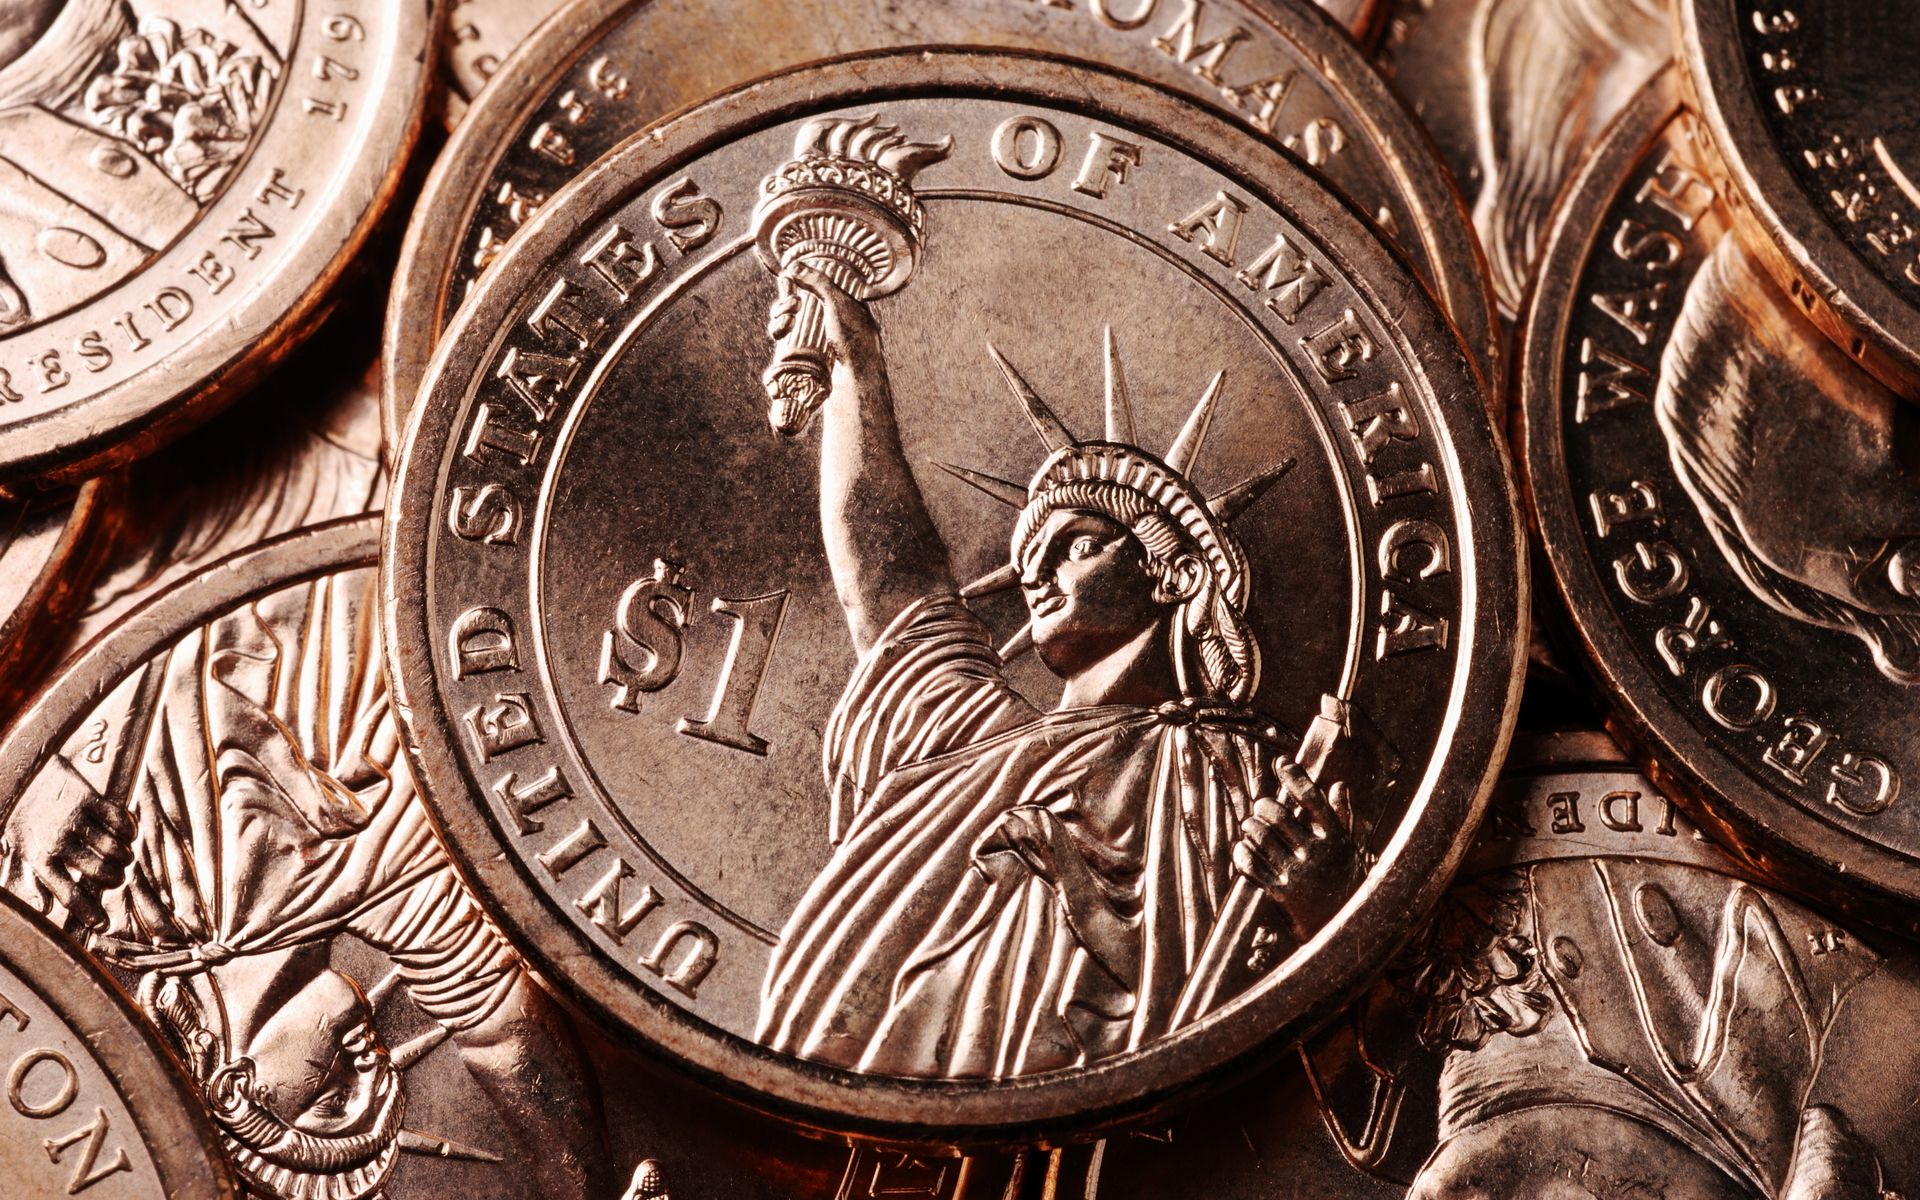 A close up of a pile of silver dollar coins with the statue of liberty on one of them. - Money